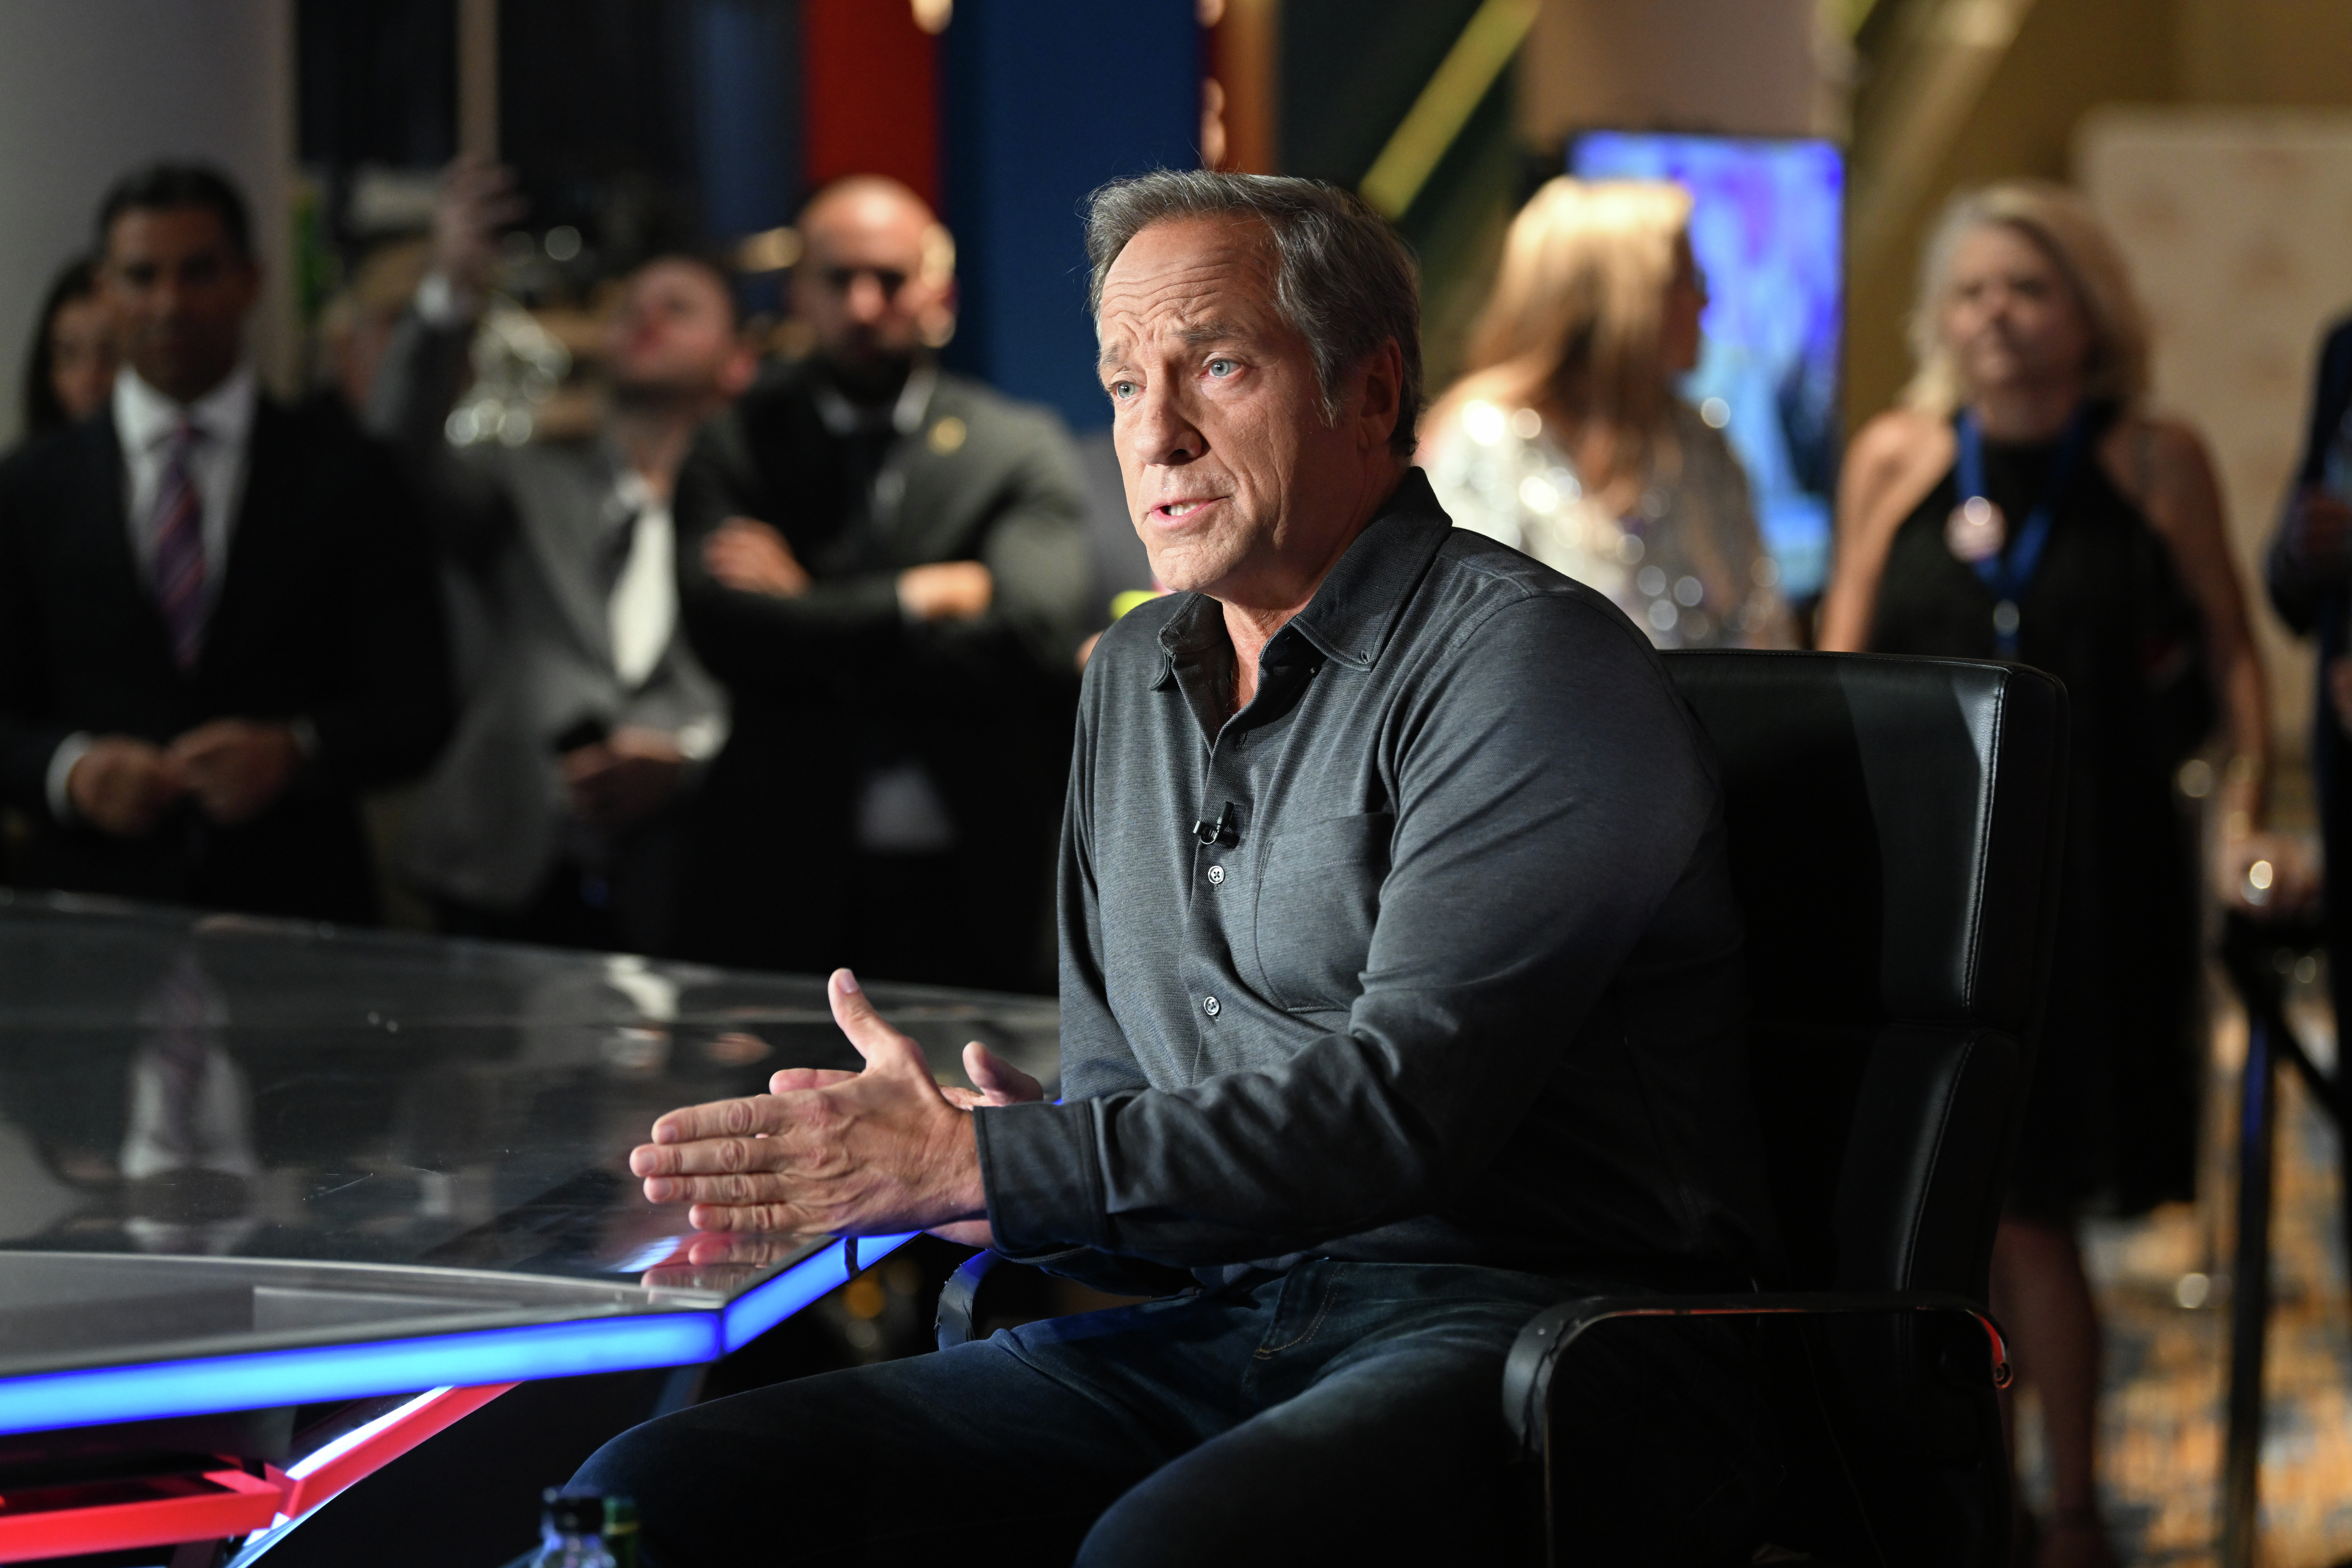 Mike Rowe on His Great New Film, 'Something to Stand For,' in Theaters June 27th